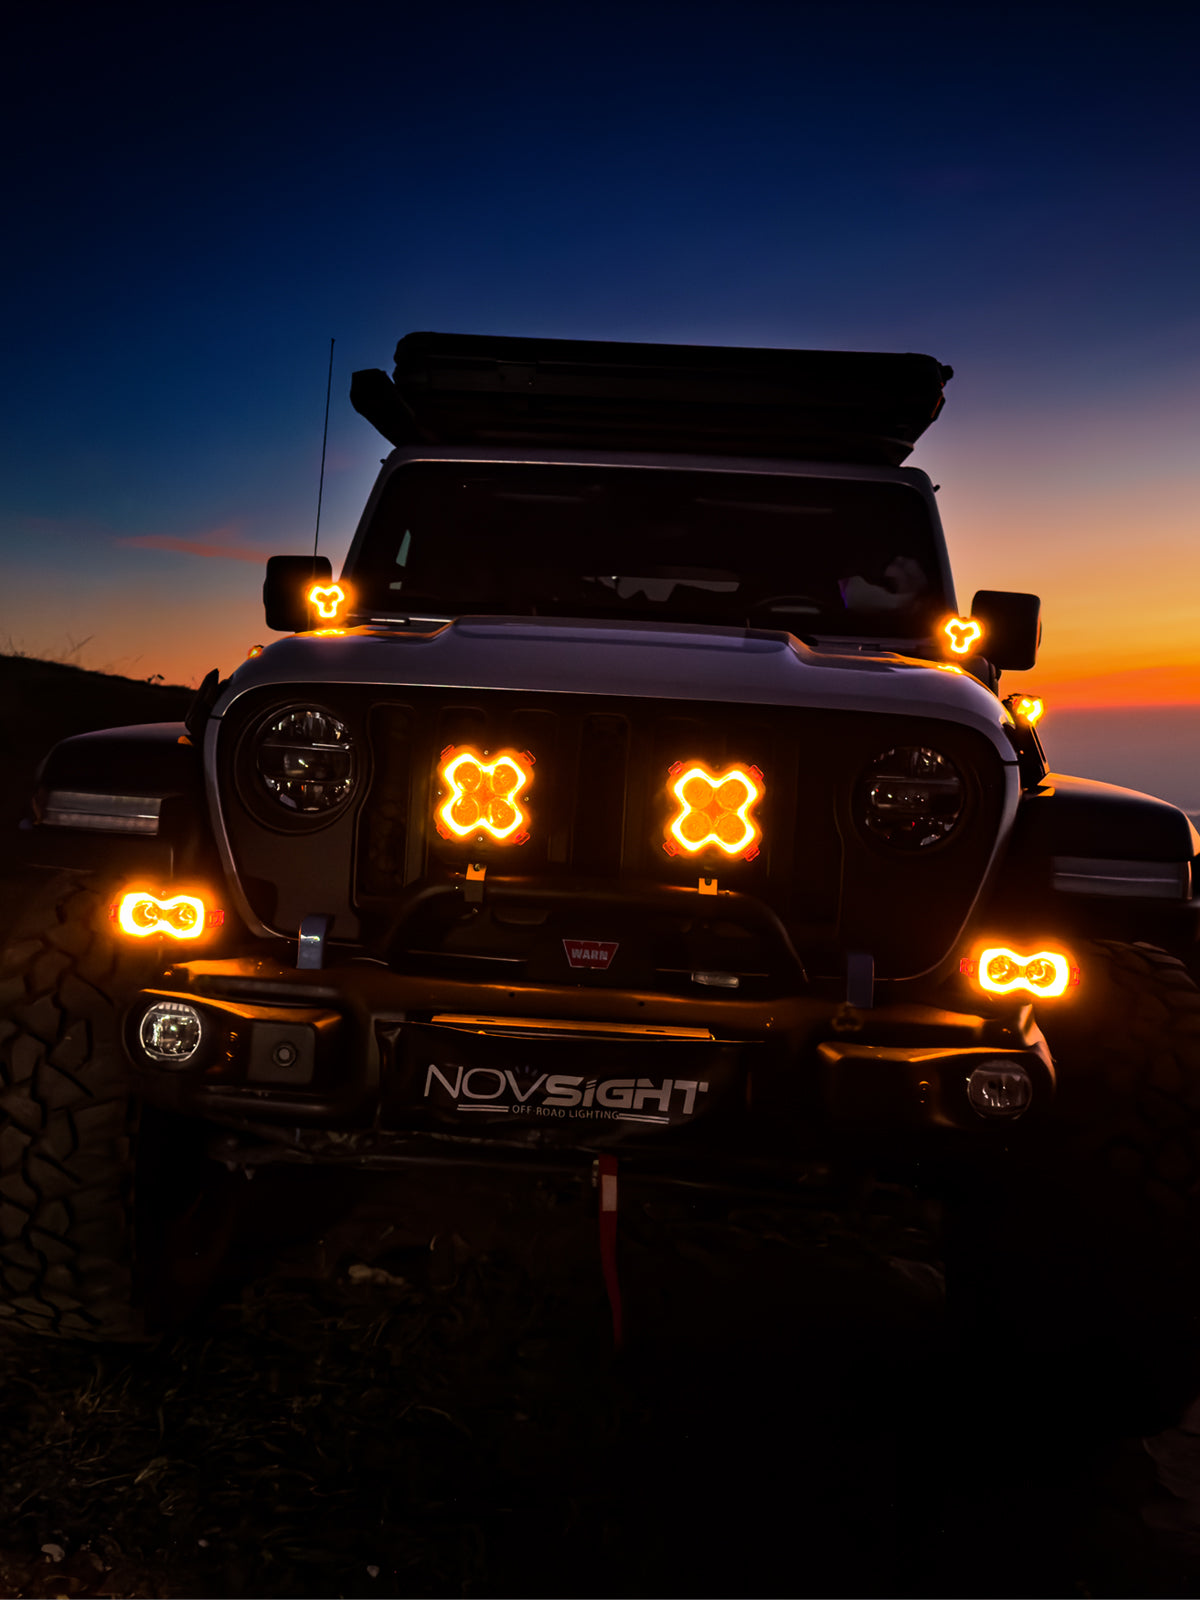 A picture show the novsight halo series pod lights